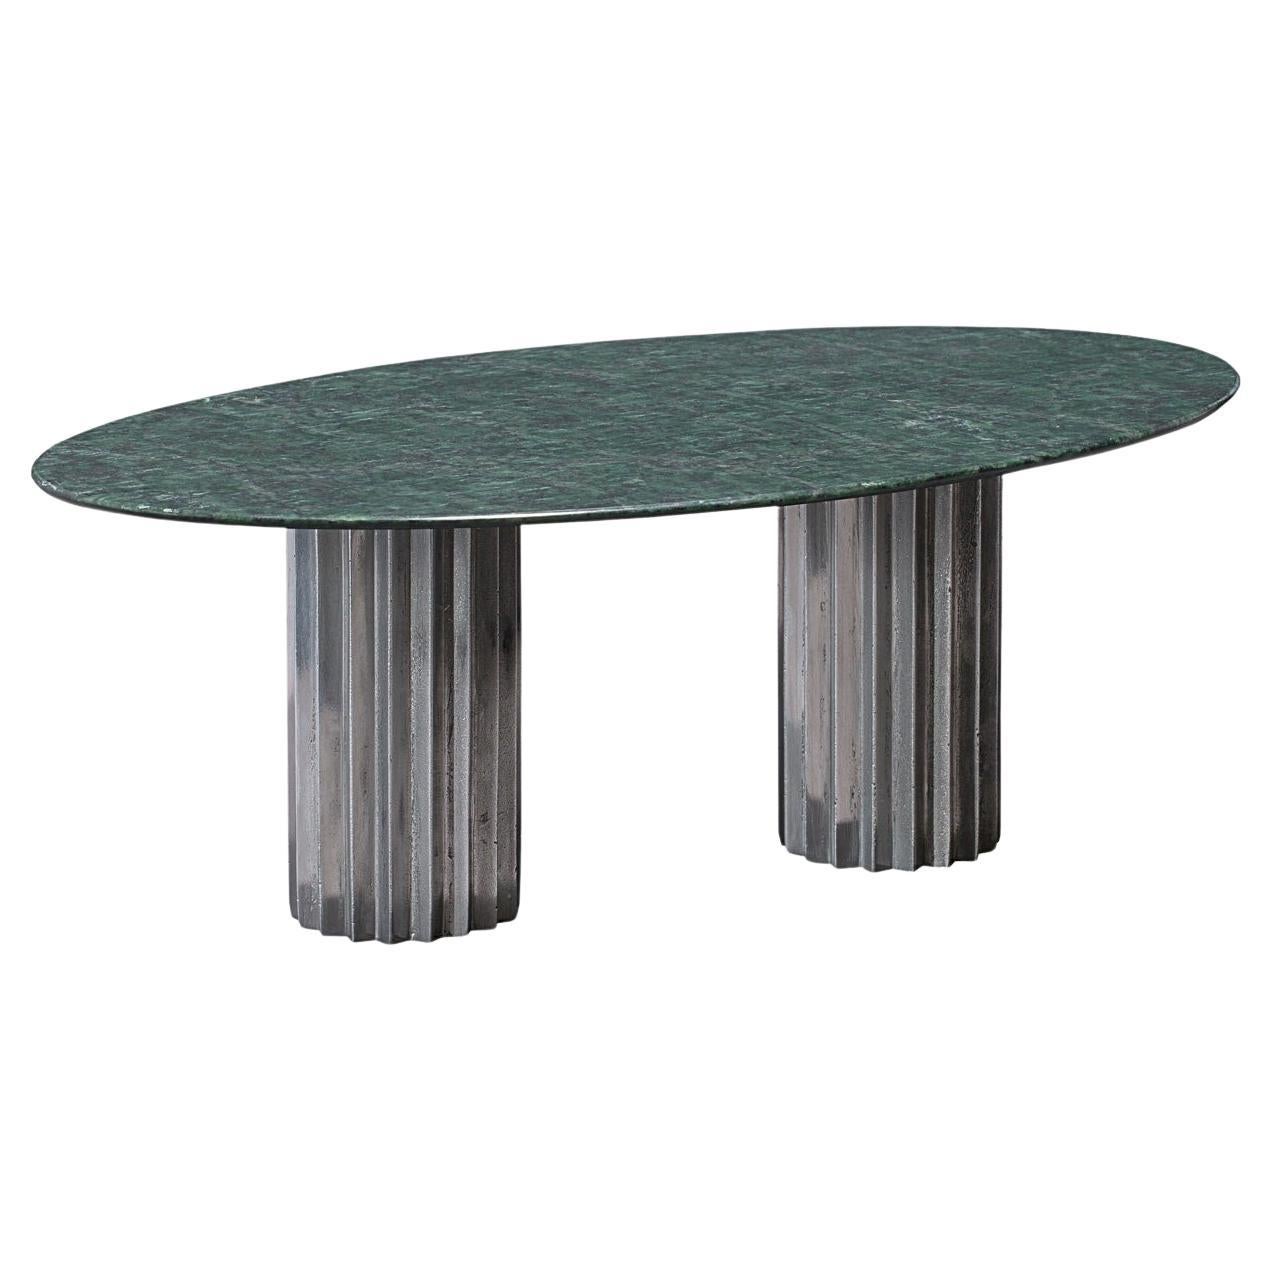 Doris Green Serpentino Marble Oval Dining Table by Fred and Juul For Sale